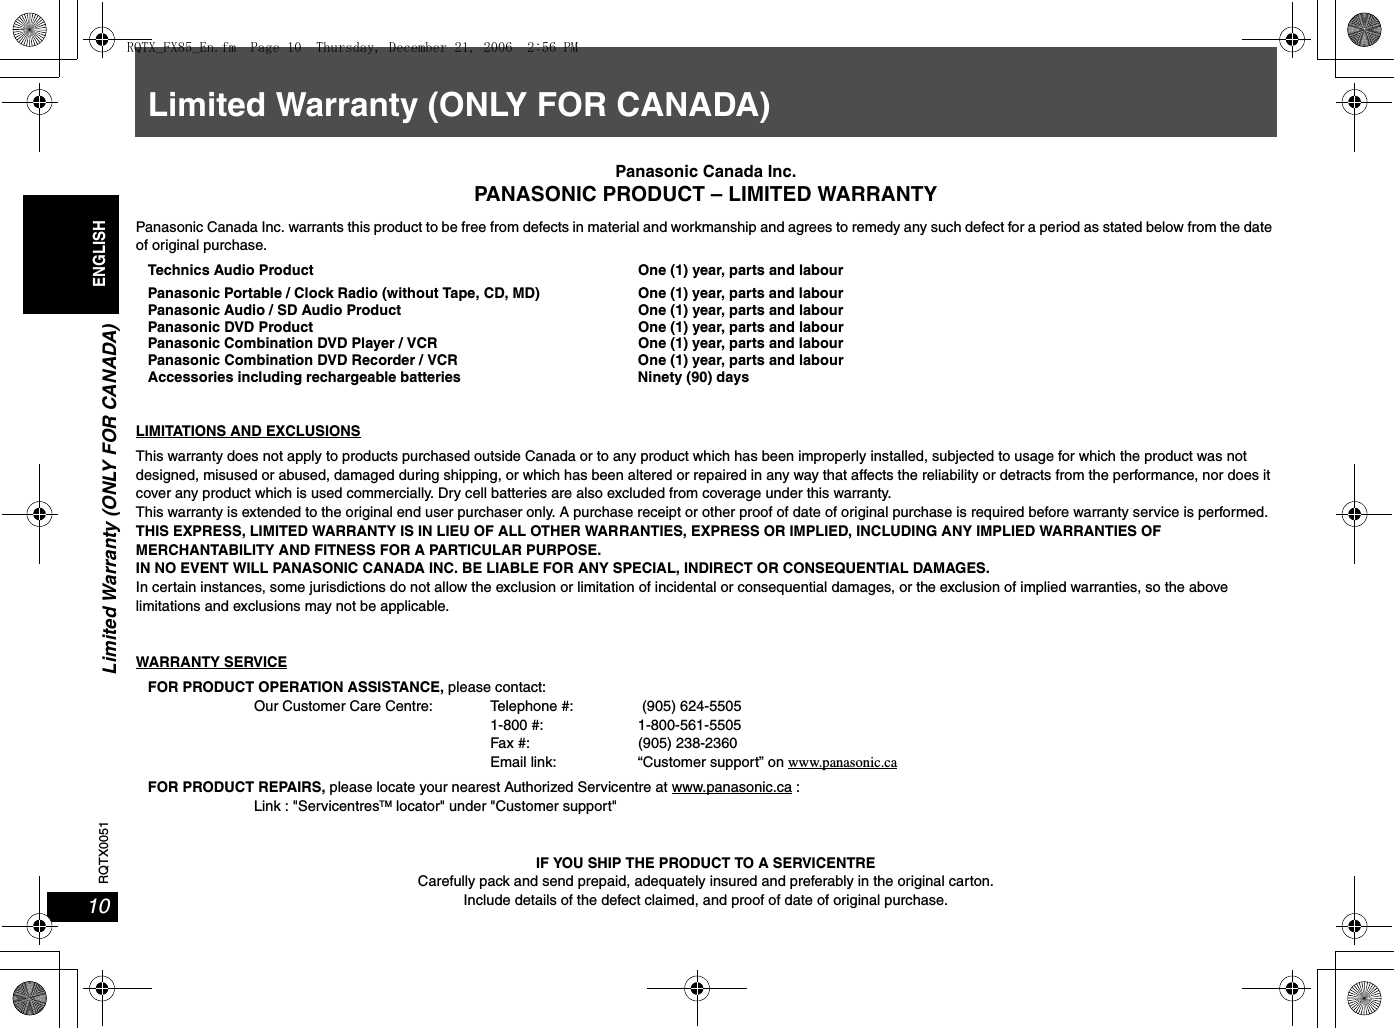 Limited Warranty (ONLY FOR CANADA)10RQTX0051ENGLISHLimited Warranty (ONLY FOR CANADA)Panasonic Canada Inc.PANASONIC PRODUCT – LIMITED WARRANTYPanasonic Canada Inc. warrants this product to be free from defects in material and workmanship and agrees to remedy any such defect for a period as stated below from the date of original purchase.Technics Audio Product One (1) year, parts and labourPanasonic Portable / Clock Radio (without Tape, CD, MD) One (1) year, parts and labourPanasonic Audio / SD Audio Product One (1) year, parts and labourPanasonic DVD Product One (1) year, parts and labourPanasonic Combination DVD Player / VCR One (1) year, parts and labourPanasonic Combination DVD Recorder / VCR One (1) year, parts and labourAccessories including rechargeable batteries Ninety (90) daysLIMITATIONS AND EXCLUSIONSThis warranty does not apply to products purchased outside Canada or to any product which has been improperly installed, subjected to usage for which the product was not designed, misused or abused, damaged during shipping, or which has been altered or repaired in any way that affects the reliability or detracts from the performance, nor does it cover any product which is used commercially. Dry cell batteries are also excluded from coverage under this warranty.This warranty is extended to the original end user purchaser only. A purchase receipt or other proof of date of original purchase is required before warranty service is performed.THIS EXPRESS, LIMITED WARRANTY IS IN LIEU OF ALL OTHER WARRANTIES, EXPRESS OR IMPLIED, INCLUDING ANY IMPLIED WARRANTIES OF MERCHANTABILITY AND FITNESS FOR A PARTICULAR PURPOSE.IN NO EVENT WILL PANASONIC CANADA INC. BE LIABLE FOR ANY SPECIAL, INDIRECT OR CONSEQUENTIAL DAMAGES.In certain instances, some jurisdictions do not allow the exclusion or limitation of incidental or consequential damages, or the exclusion of implied warranties, so the above limitations and exclusions may not be applicable.WARRANTY SERVICEFOR PRODUCT OPERATION ASSISTANCE, please contact: Our Customer Care Centre: Telephone #:  (905) 624-5505 1-800 #: 1-800-561-5505Fax #:   (905) 238-2360Email link: “Customer support” on www.panasonic.ca FOR PRODUCT REPAIRS, please locate your nearest Authorized Servicentre at www.panasonic.ca :Link : &quot;ServicentresTM locator&quot; under &quot;Customer support&quot;IF YOU SHIP THE PRODUCT TO A SERVICENTRECarefully pack and send prepaid, adequately insured and preferably in the original carton.Include details of the defect claimed, and proof of date of original purchase.RQTX_FX85_En.fm  Page 10  Thursday, December 21, 2006  2:56 PM